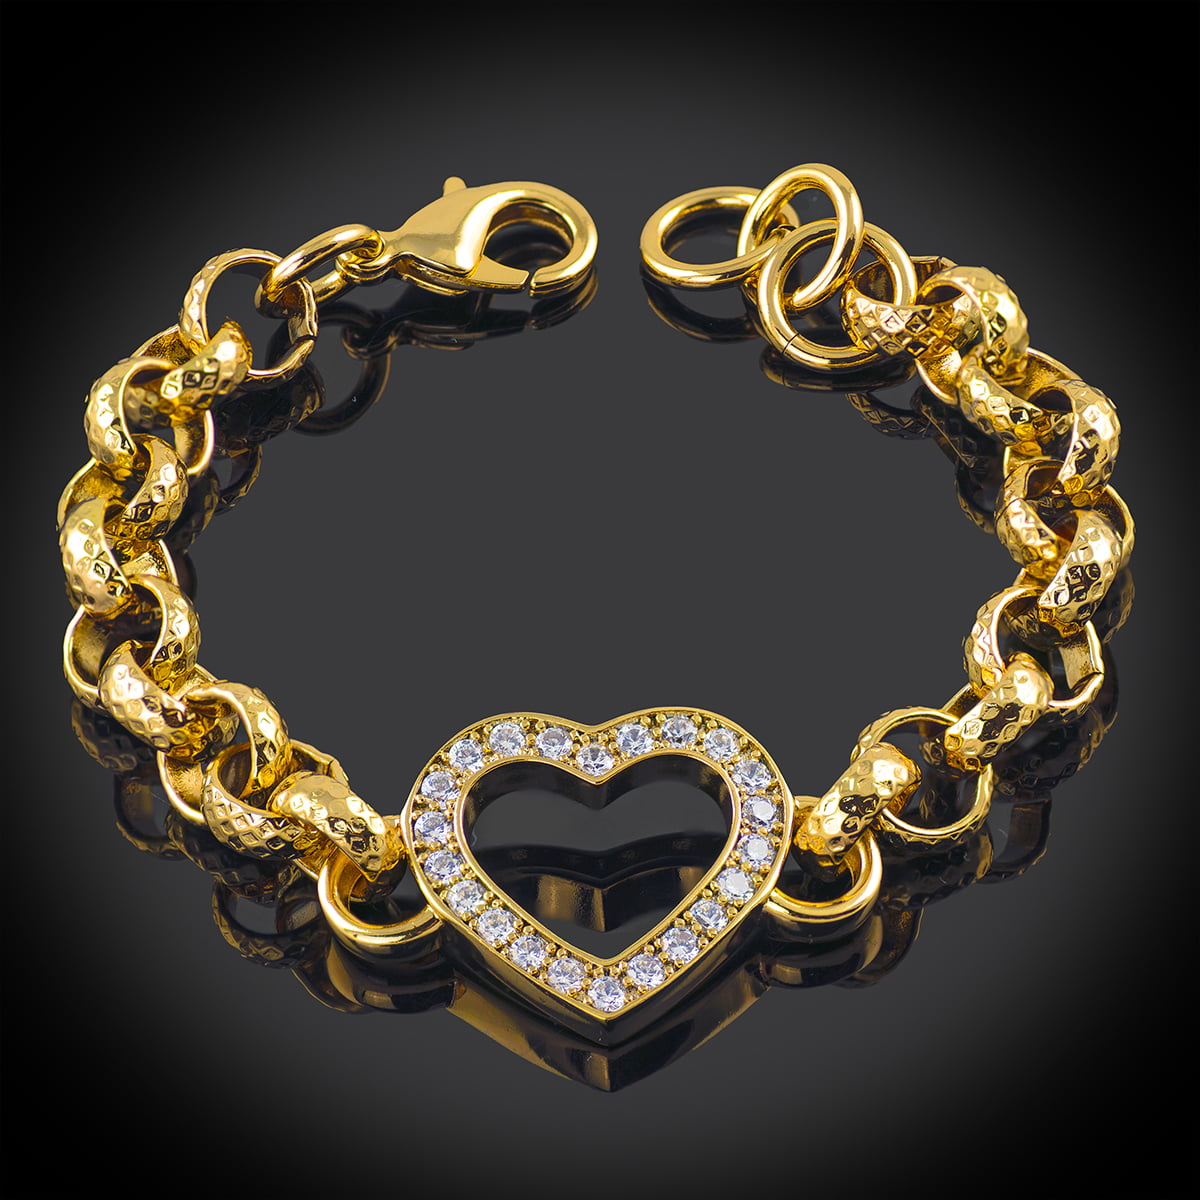 jvjewellers.co.uk/product/18ct-g…

#UrbanCollection #Urban #Jewellers #Jewellery #Gold #GoldBonded #Bracelet #Belcher #Heart #BelcherBracelet #GoldBracelet #HeartBracelet #KidsBracelet #KidsJewellery #KidsFashion #GiftsForKids #Children #ChildrenGifts #ForSale #Love #Family #Luxury #Beauty